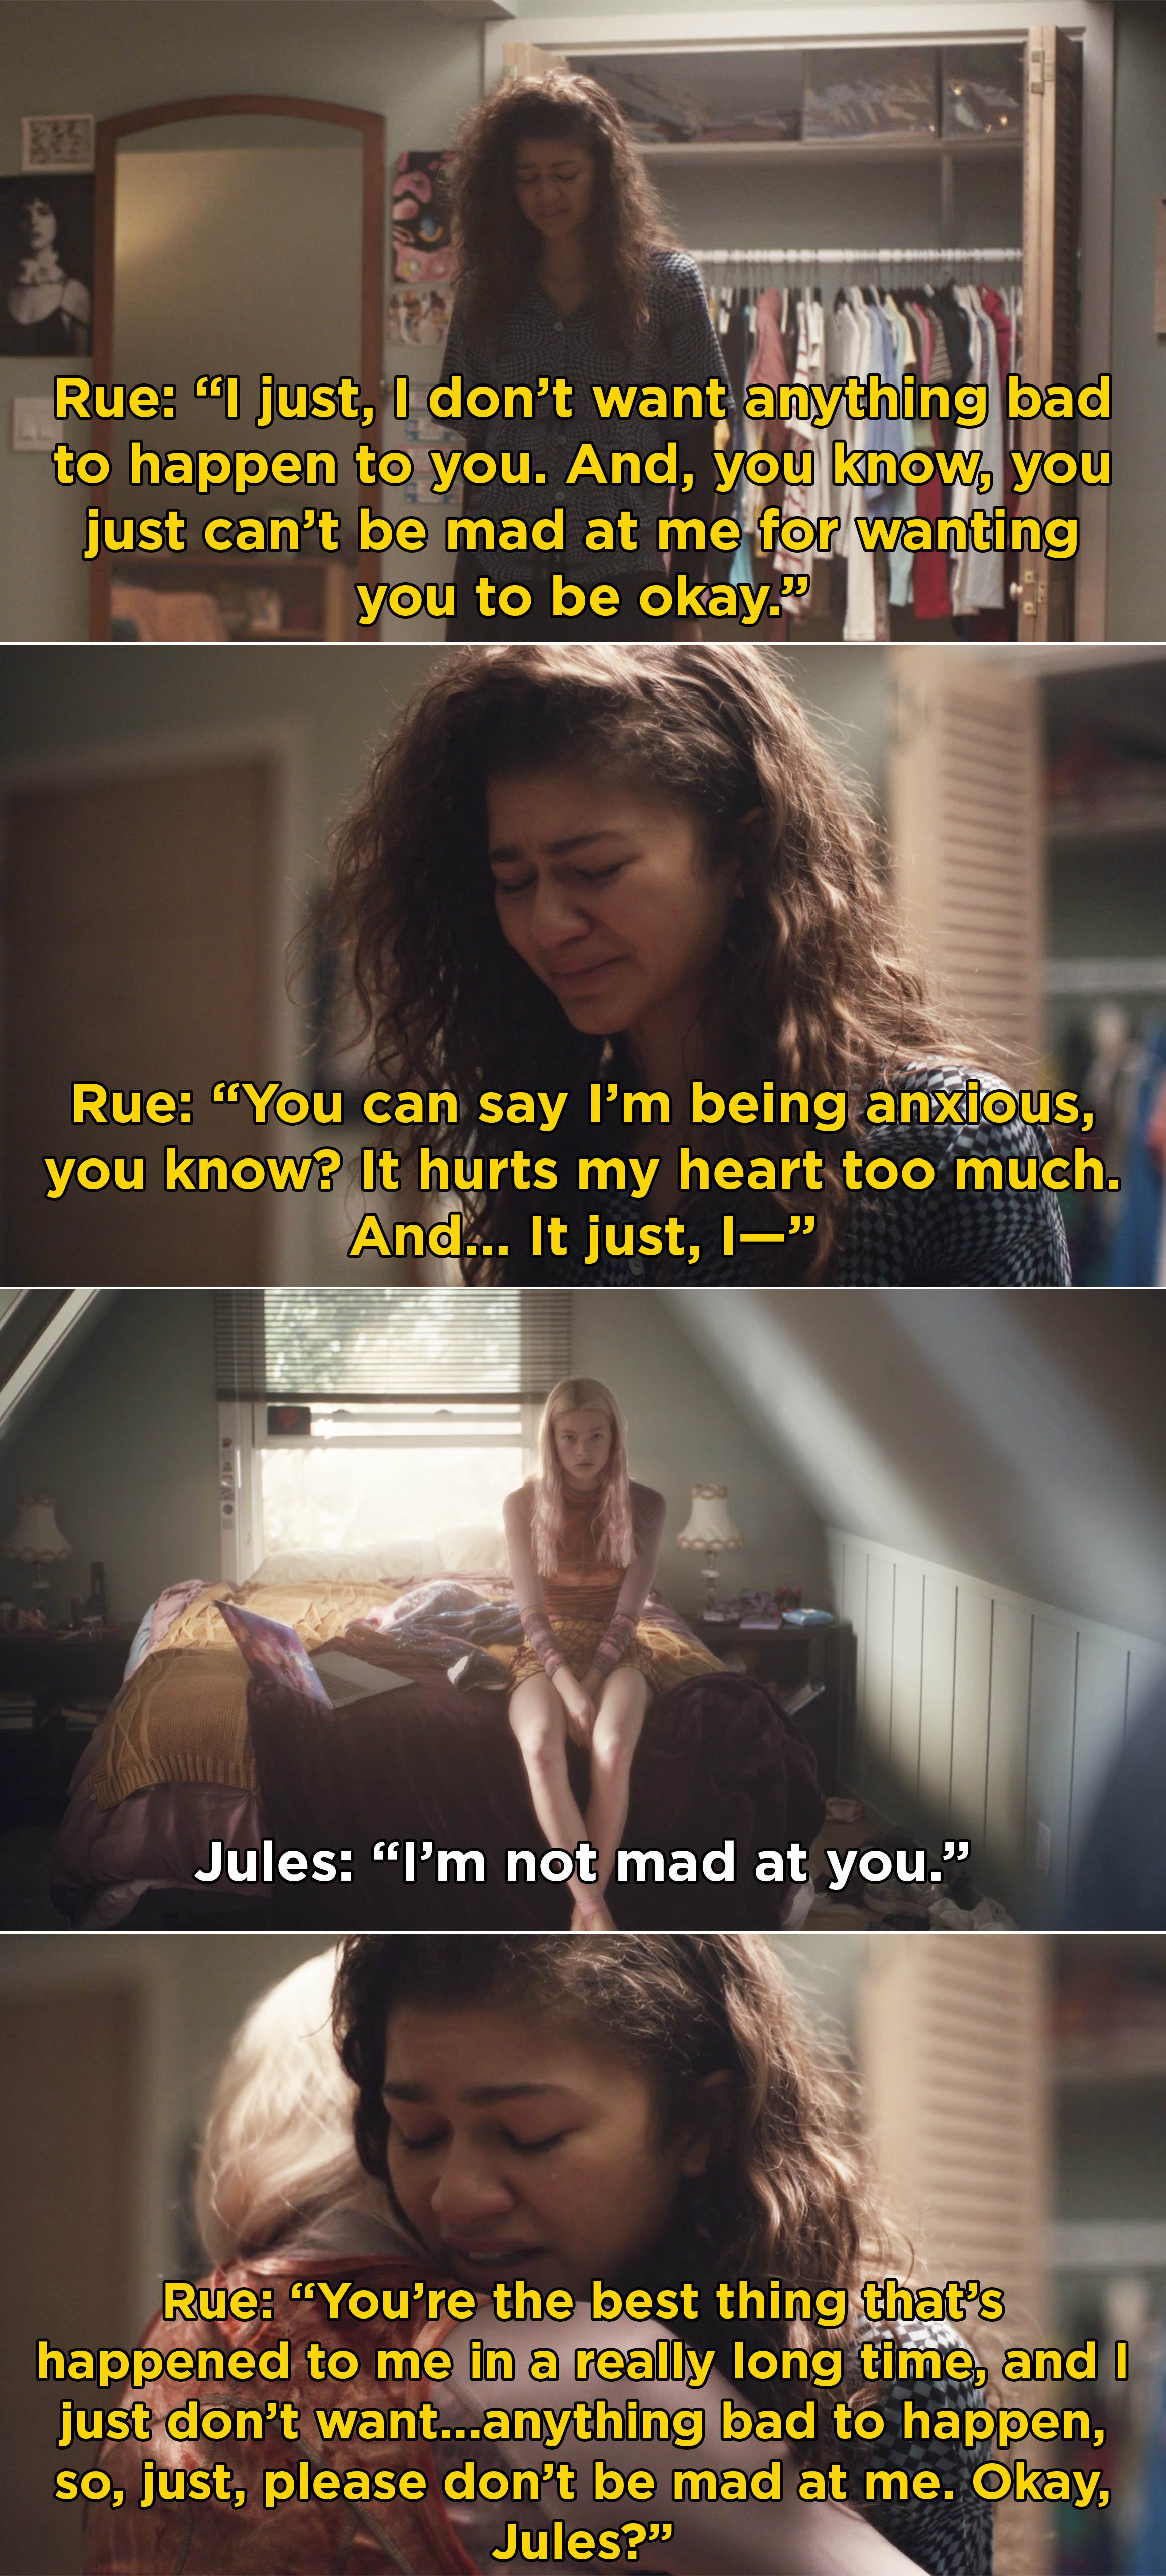 Rue asking Jules to forgive her for being so worried and anxious